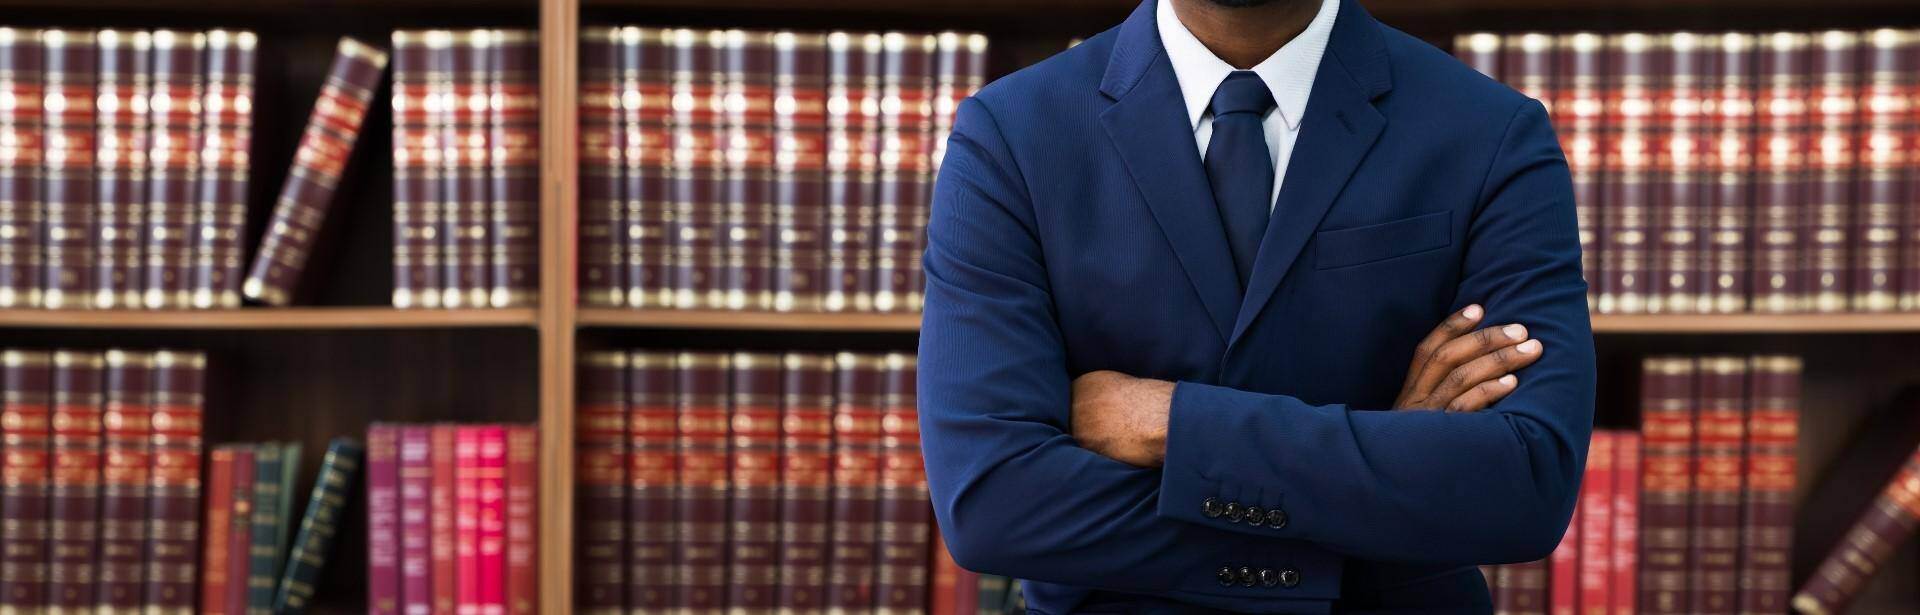 A black lawyer standing in front of a bookshelf of law book in Savannah, Georgia